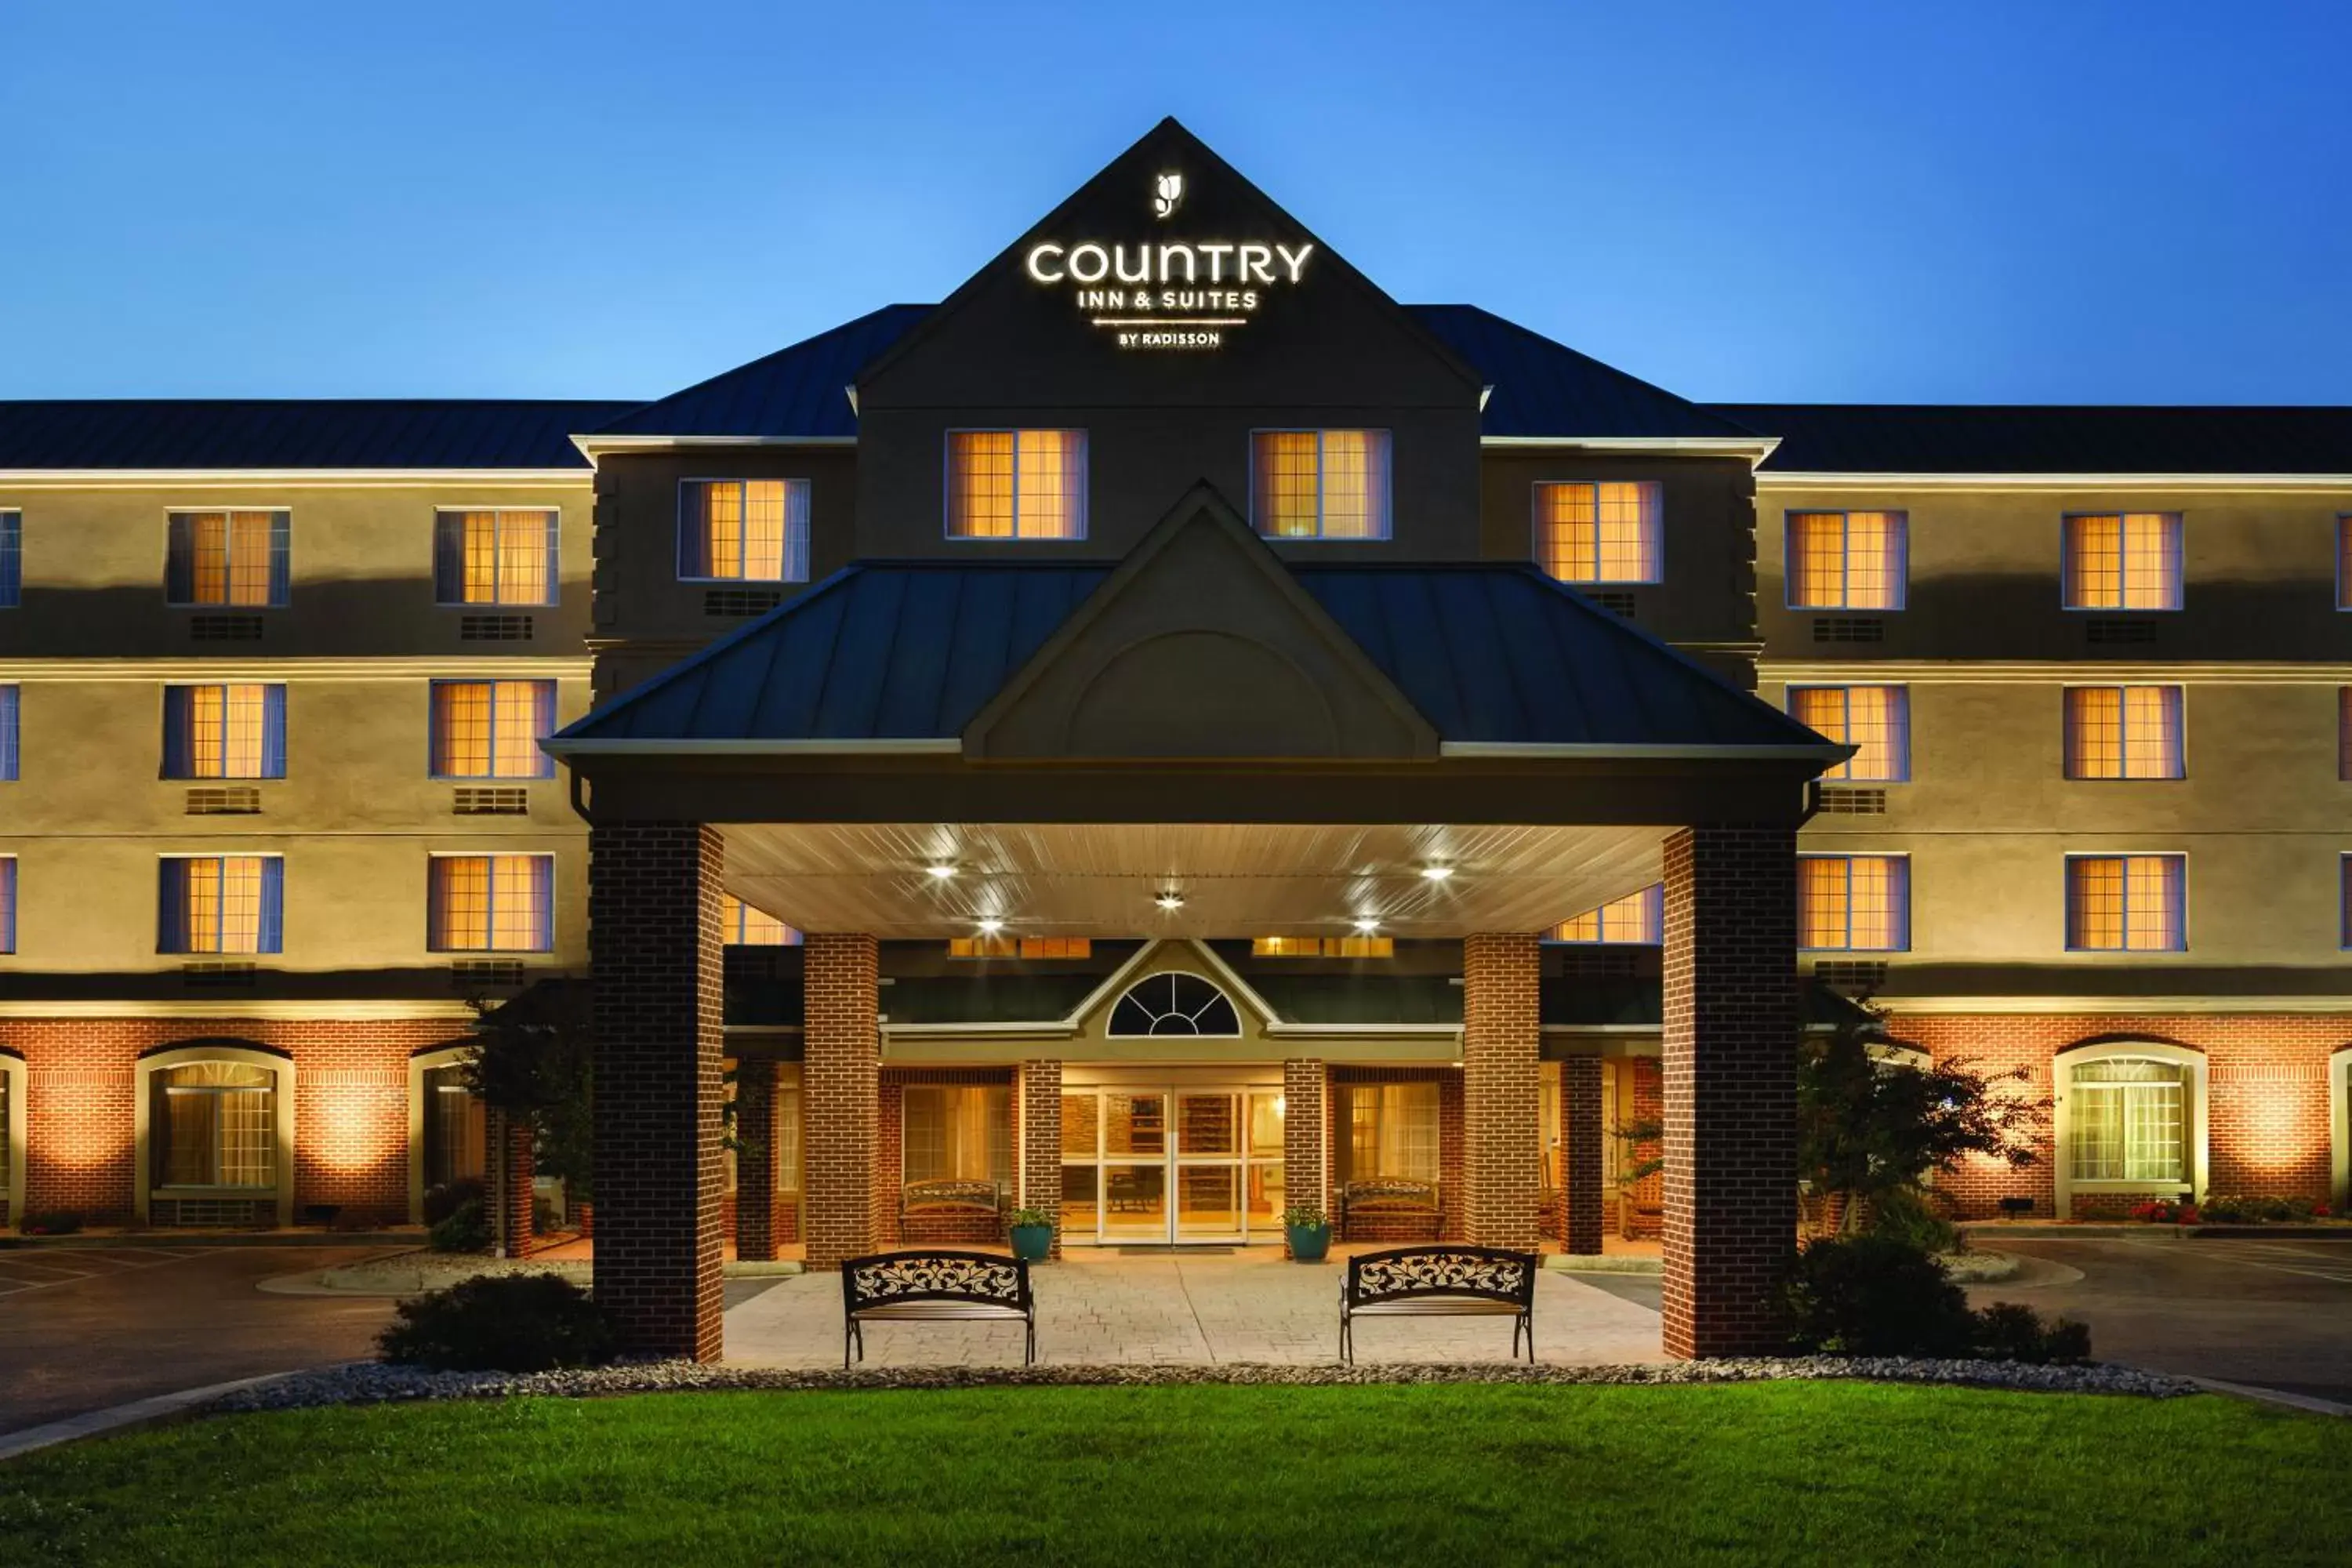 Property building in Country Inn & Suites by Radisson, Lexington, VA